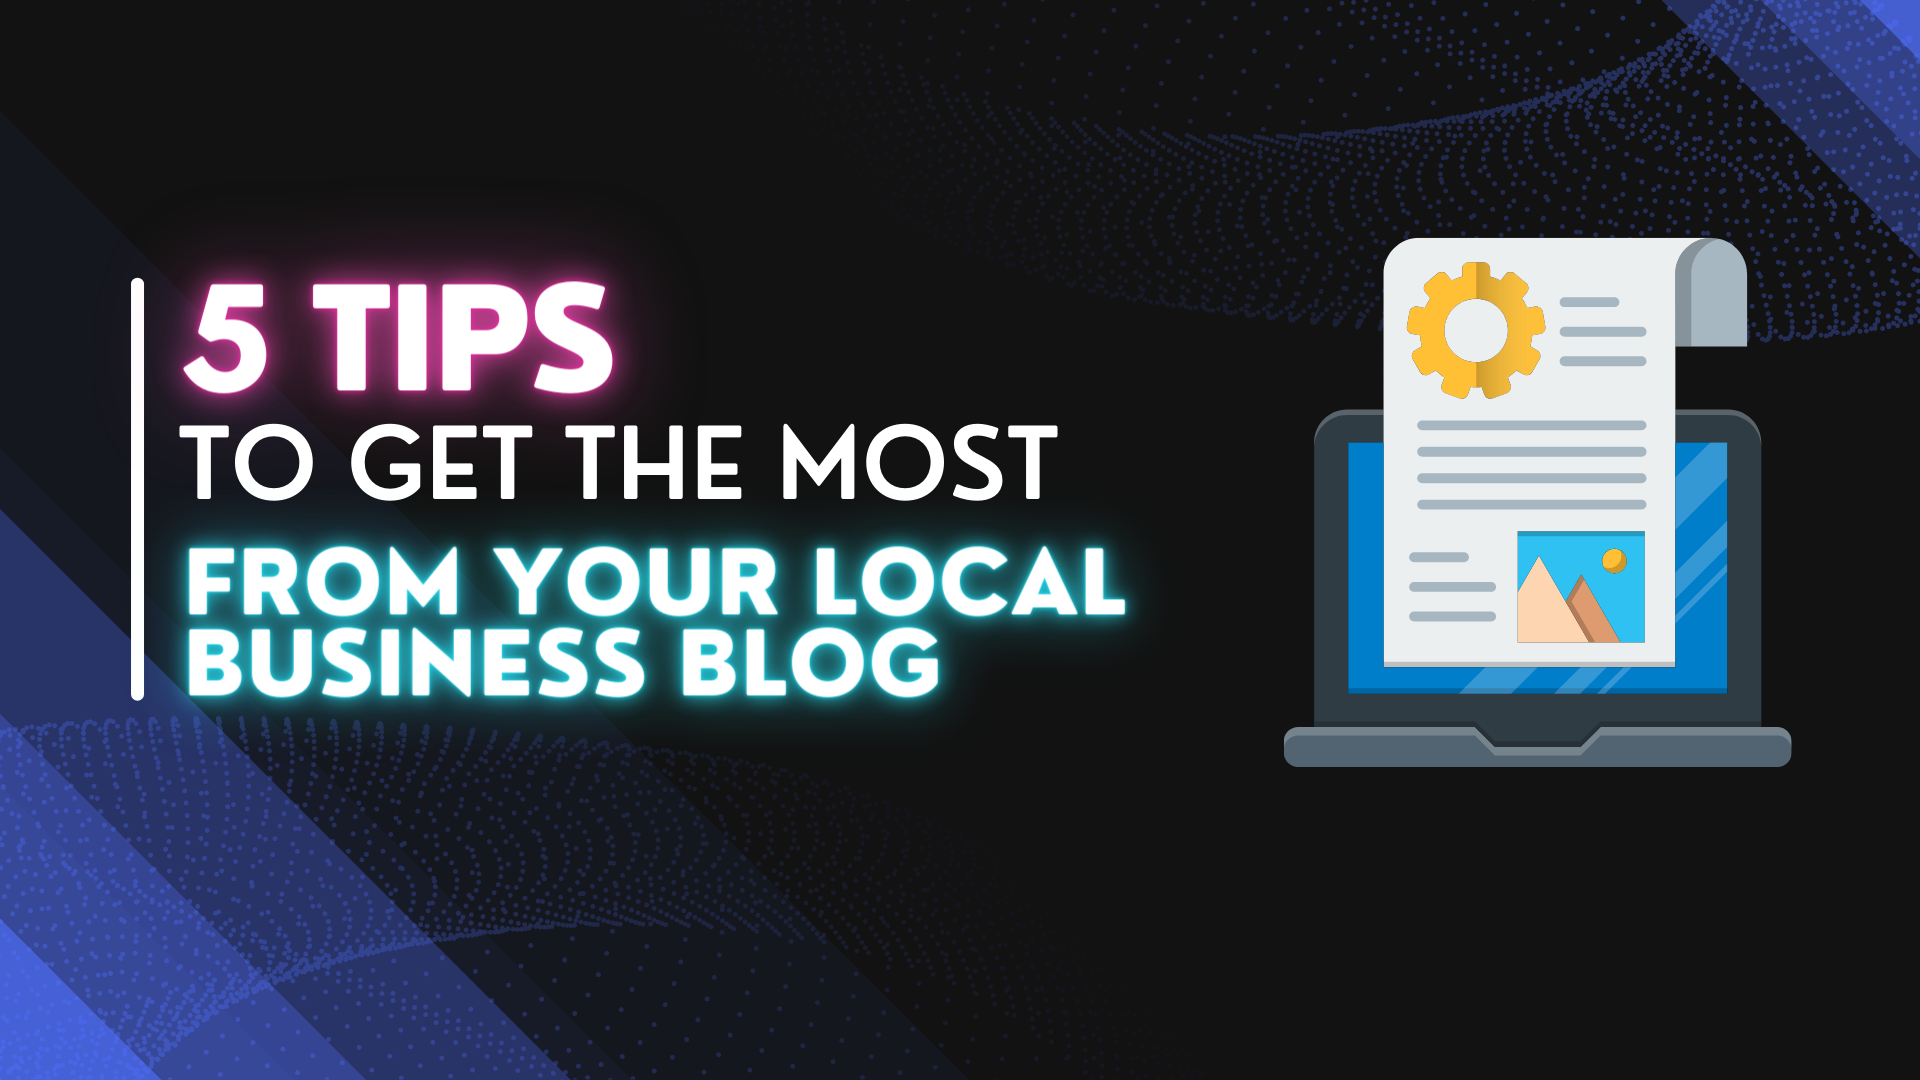 5 Tips to get the most from your local business blog